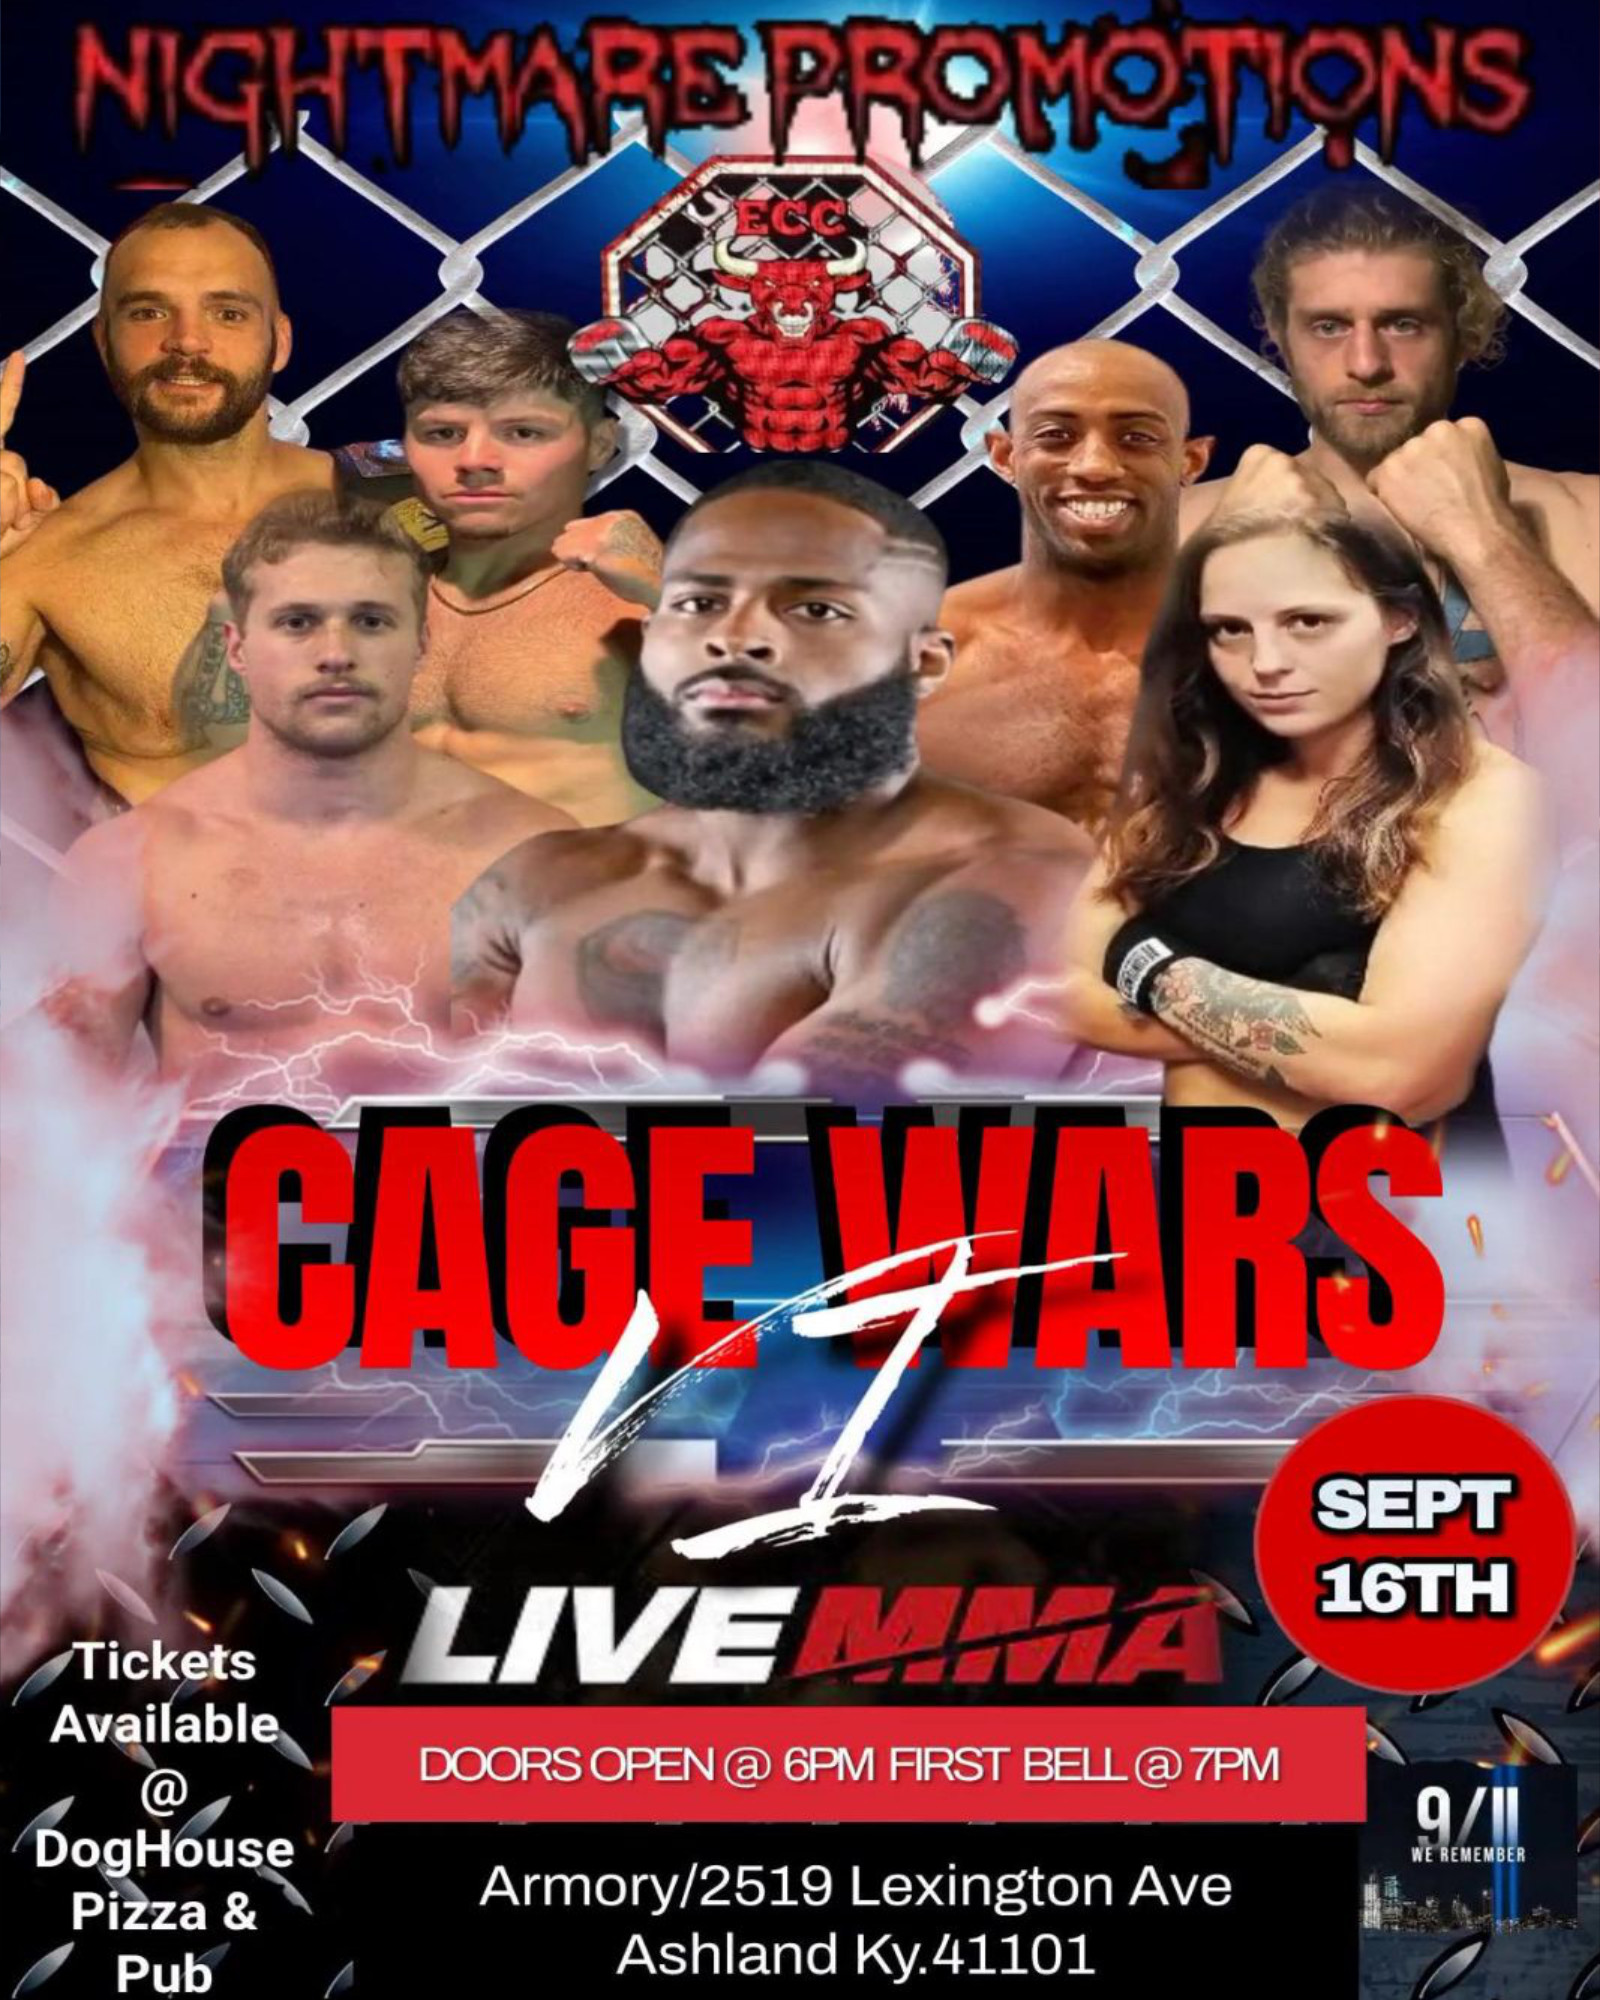 Watch ECC Cage Wars 6 on Combat Sports Now